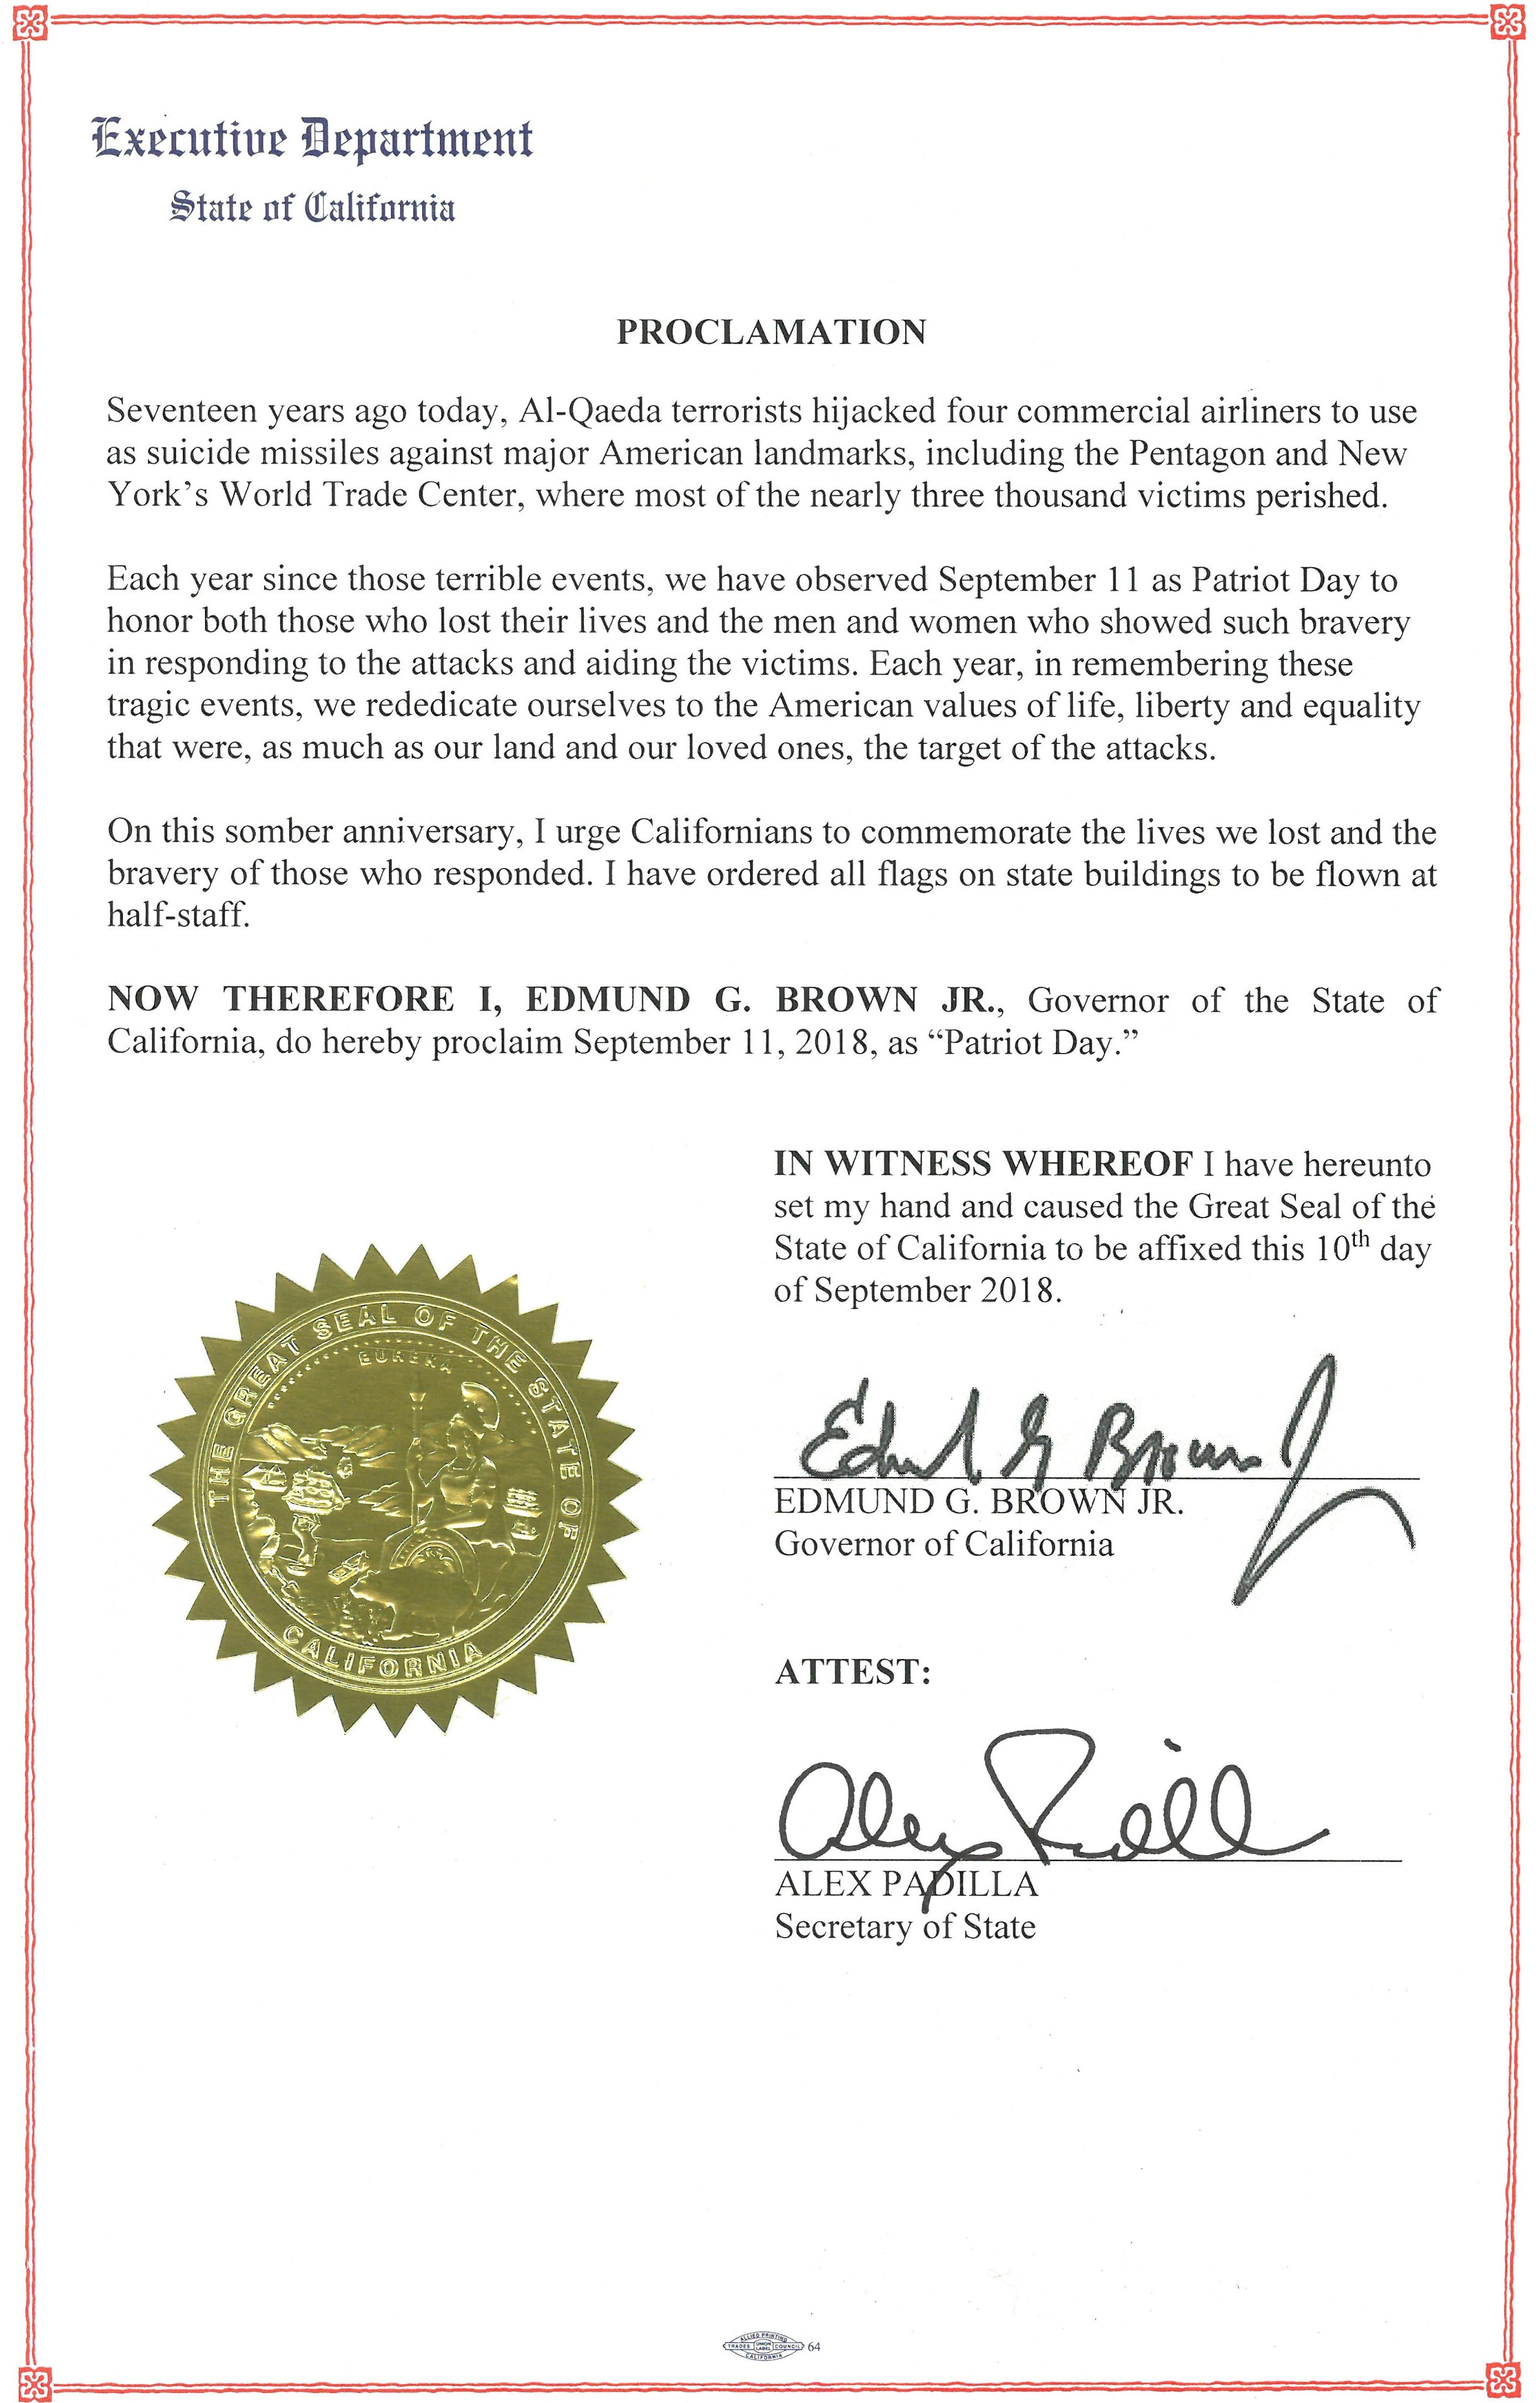 Governor Brown Issues Proclamation Declaring Patriot Day